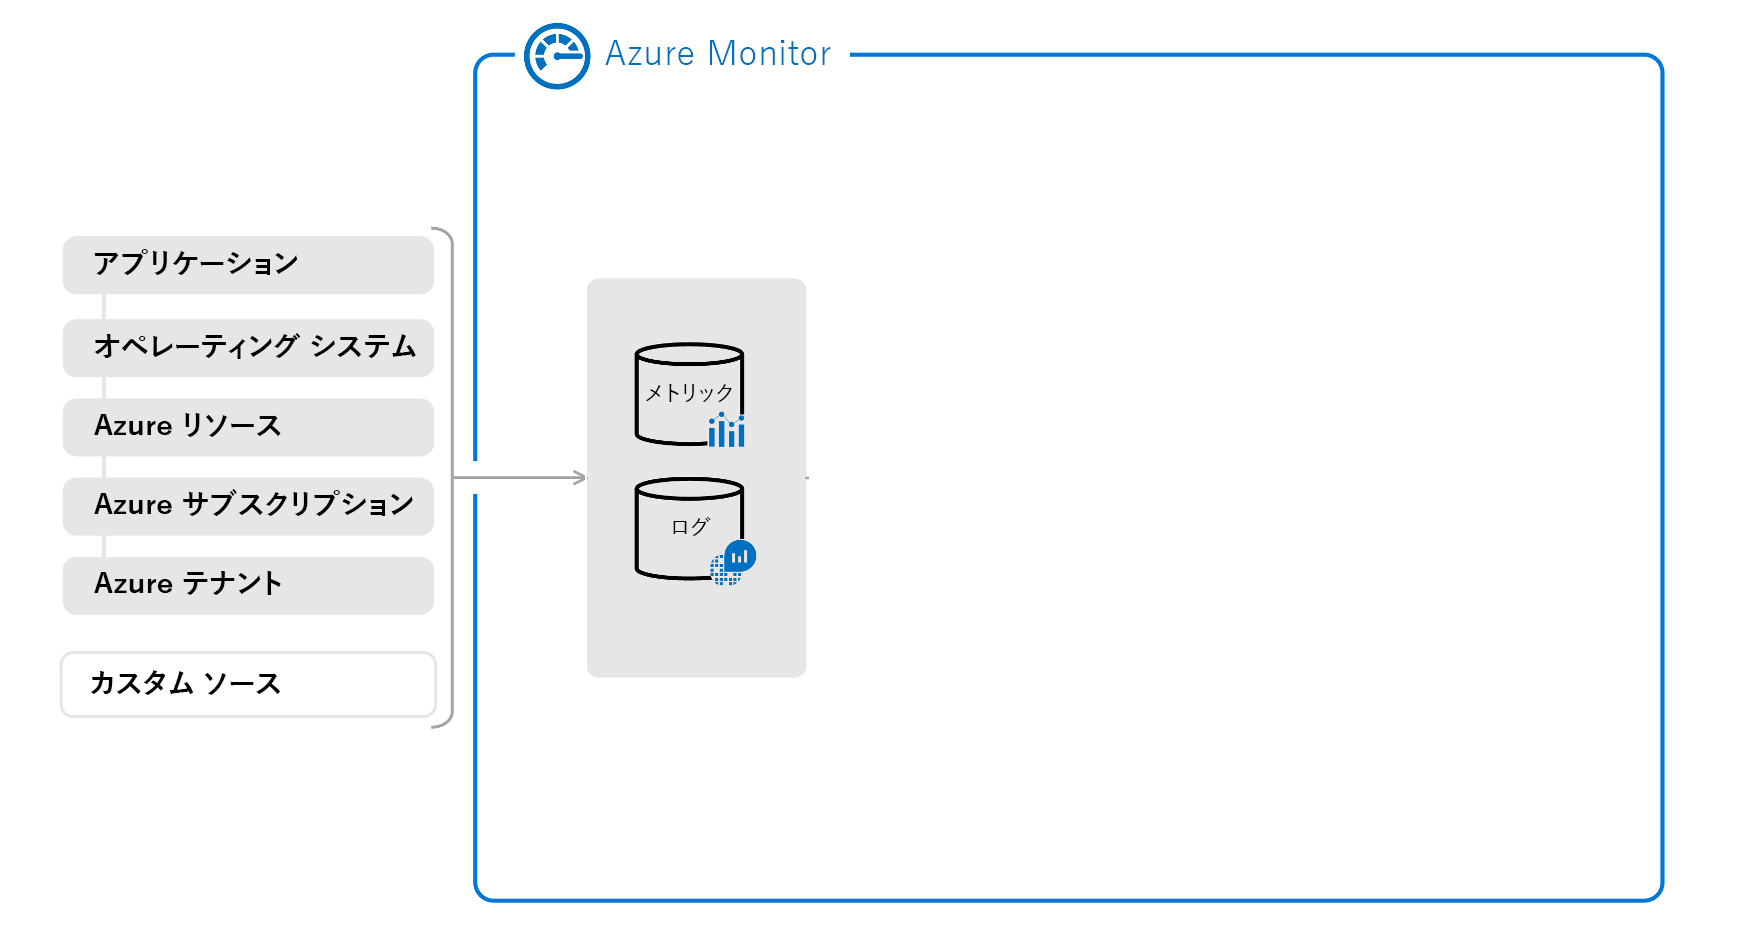 Diagram of a partial overview of Azure monitor showing data types.